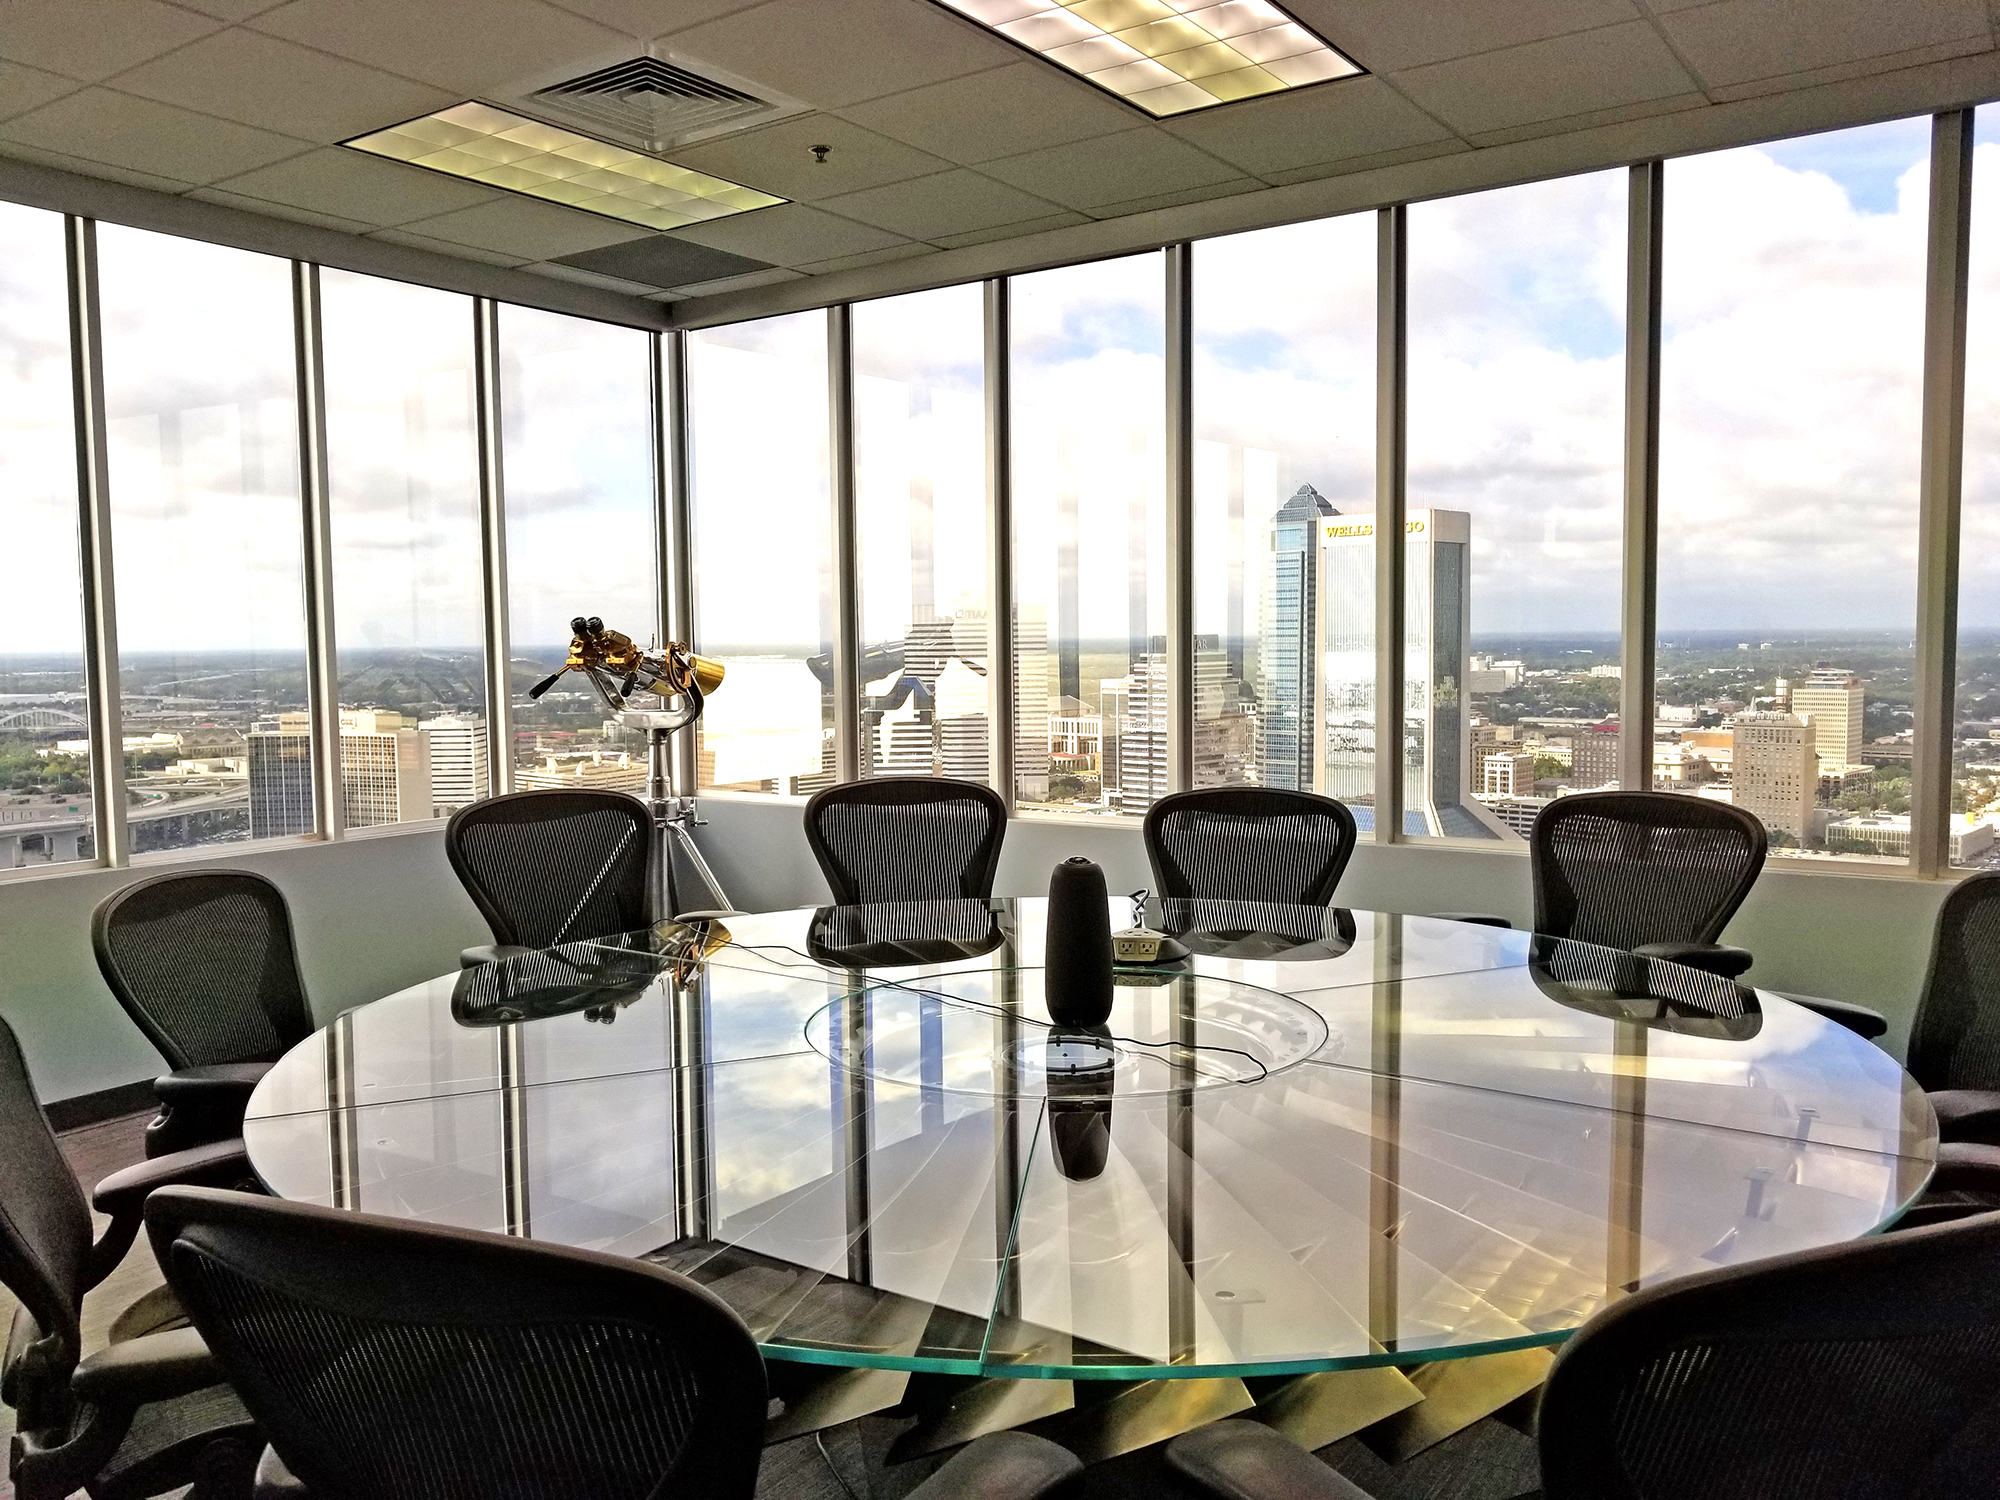 The Finxact meeting room features views of Downtown and a table built on a turbofan from a Boeing 747 engine.